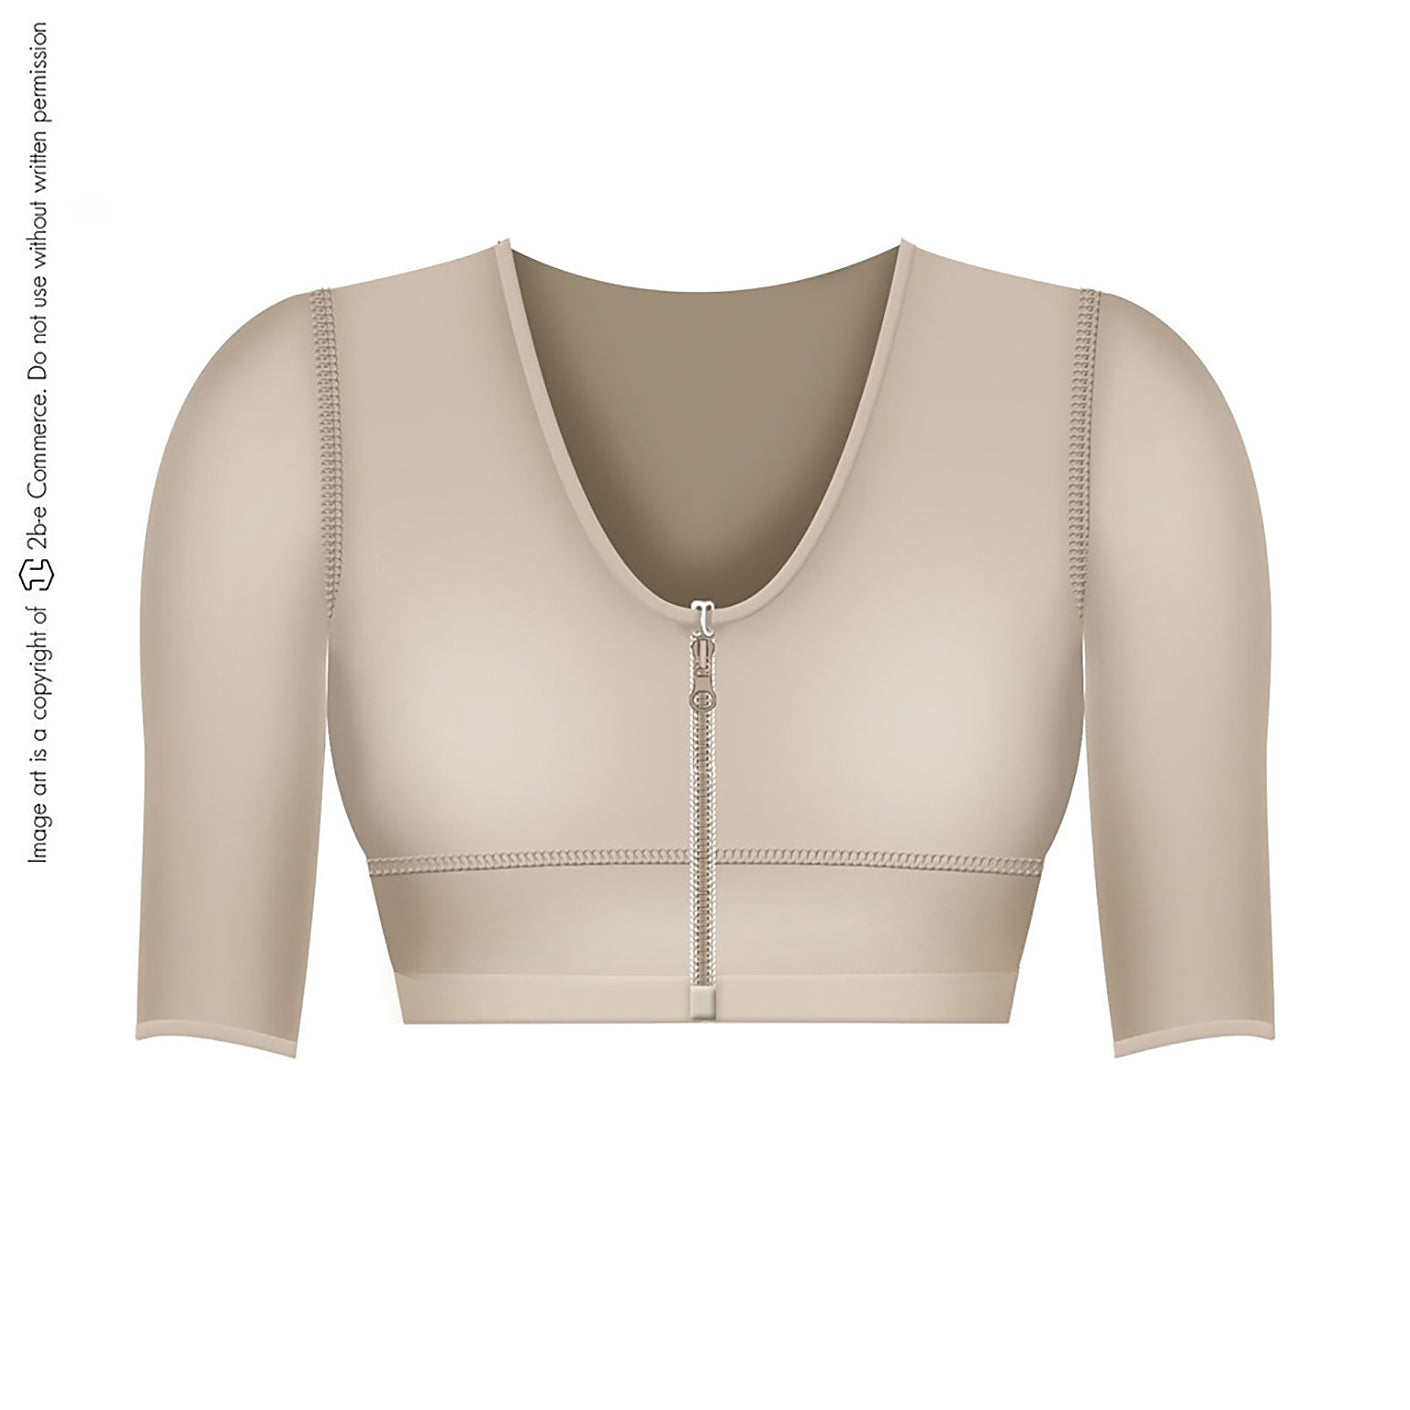 Salome Shapewear: 0328-3 - Surgical Breast Augmentation Bra with Sleev -  Showmee Store